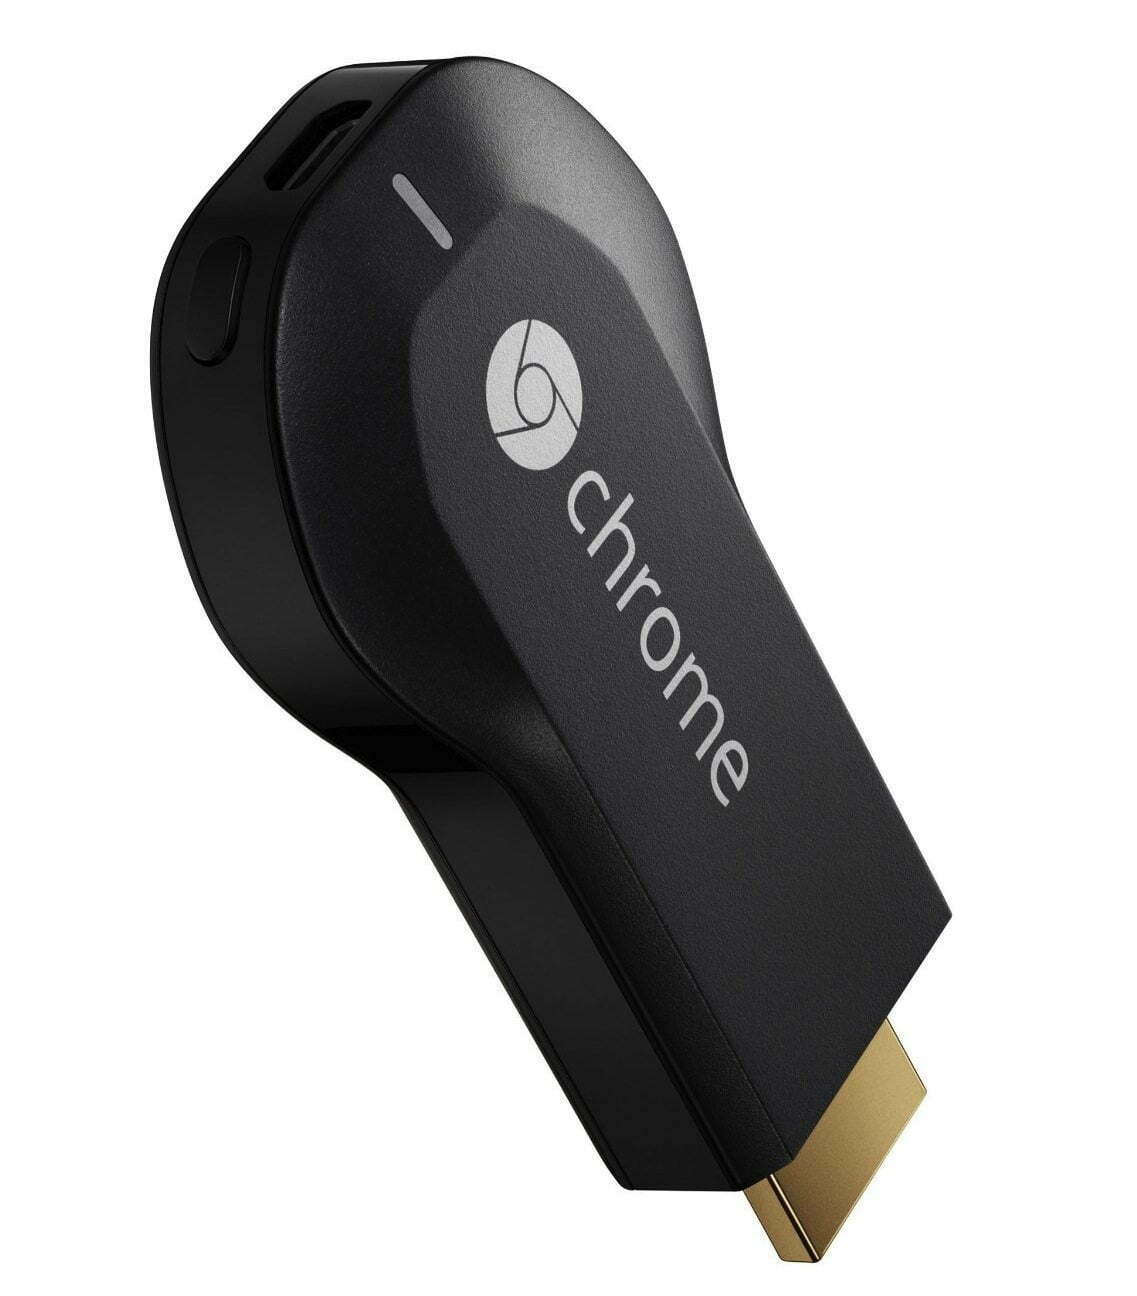 Google Chromecast Lets You Stream Any Content From The Browser, Netflix & YouTube - Gadget Review